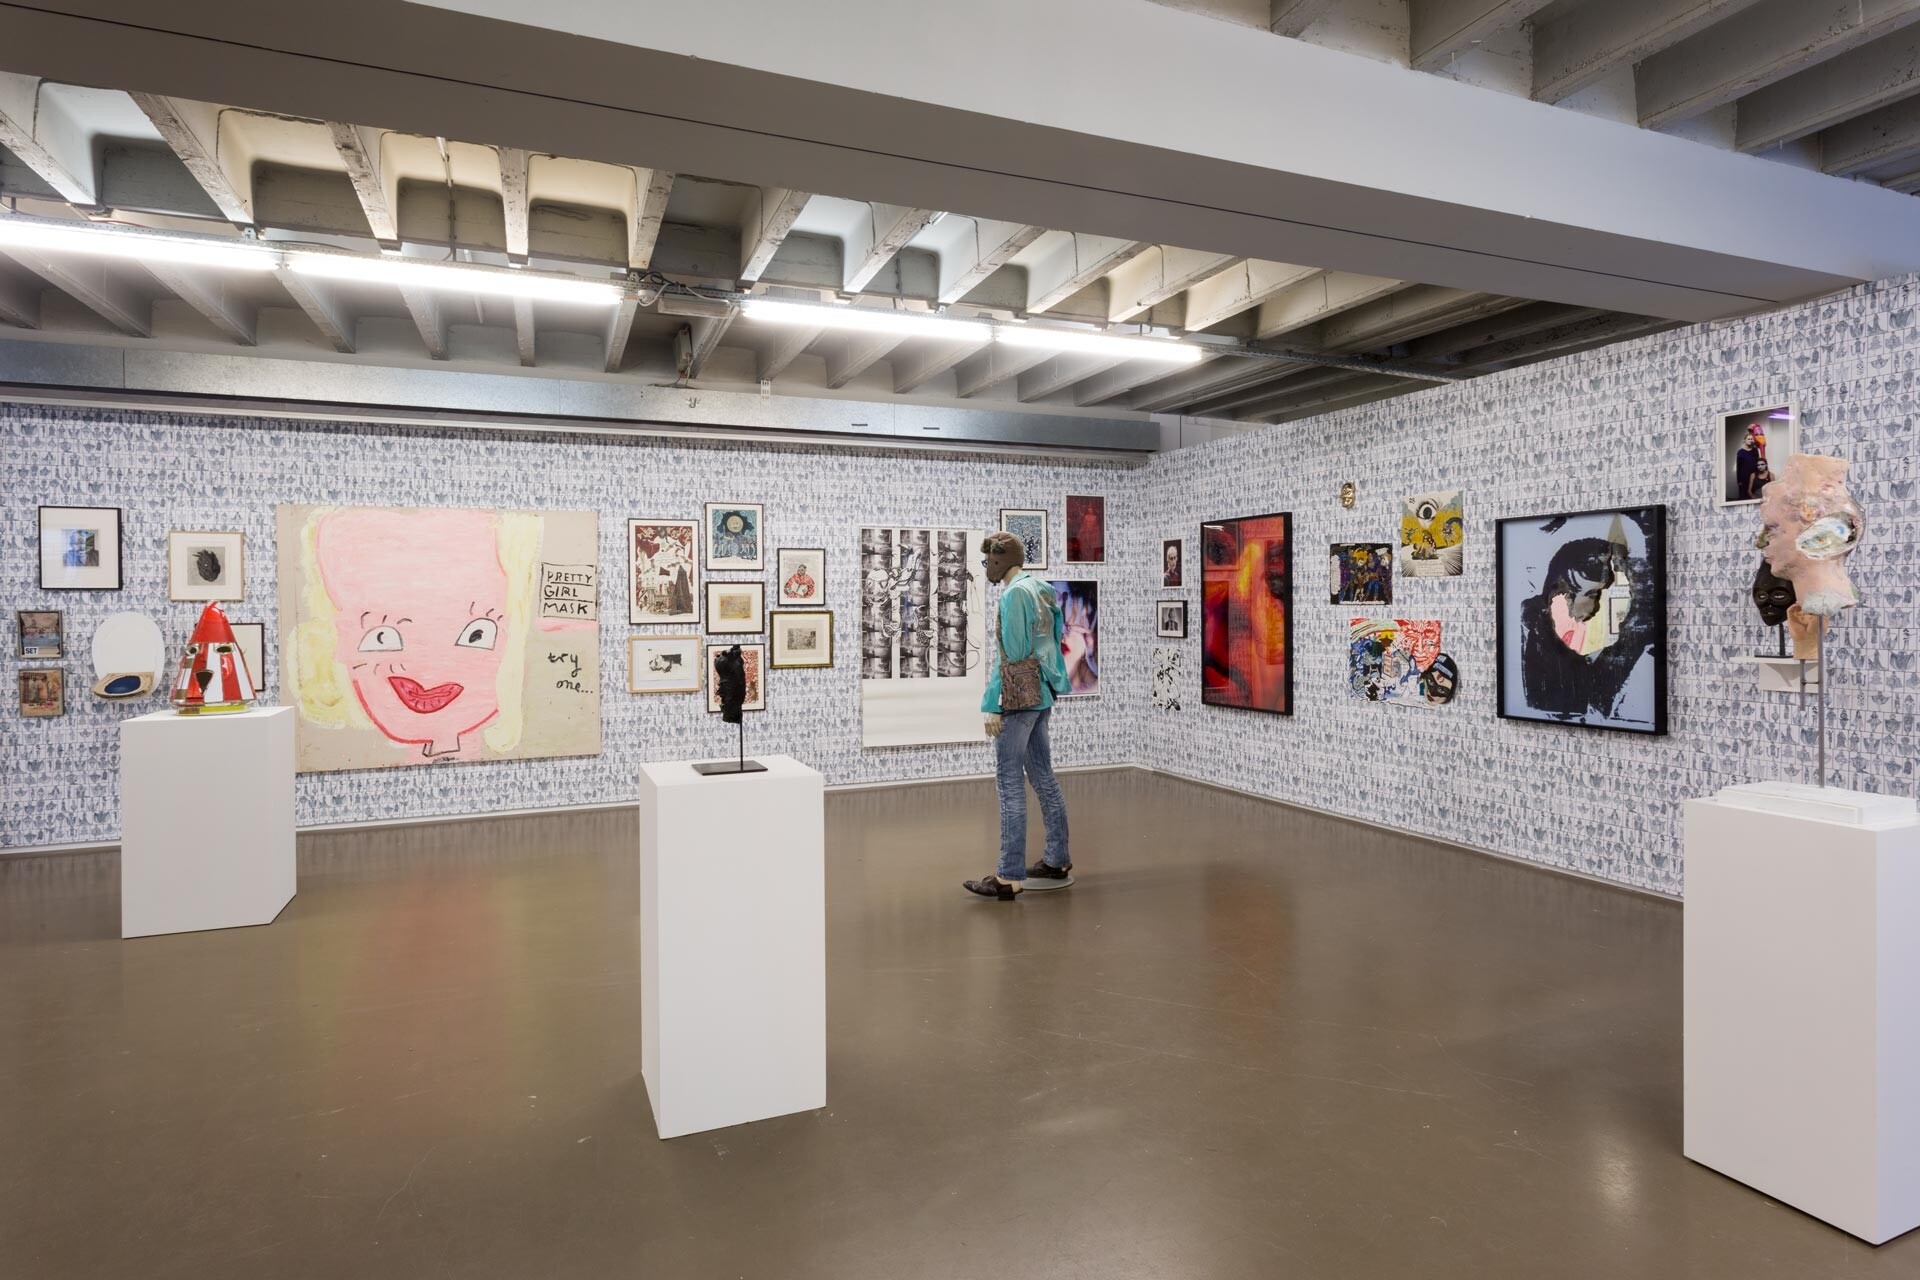 Installation view of Independent Brussels, in Brussels, Belgium, dated 2018.